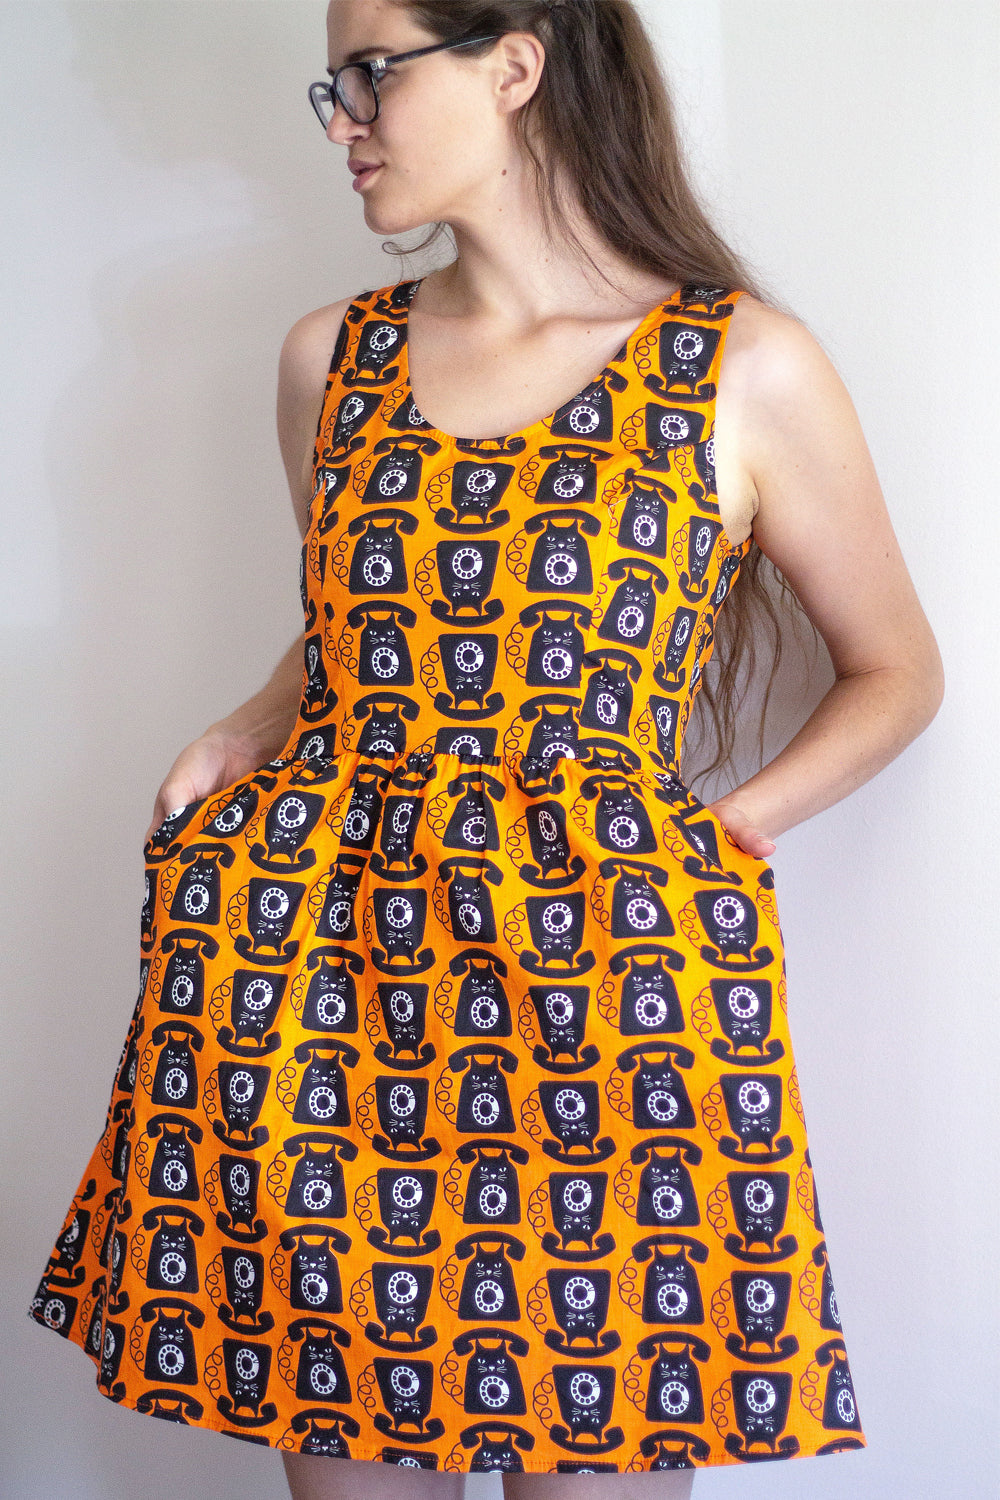 Bright orange black white cat phone print fit and flare above knee dress with pockets